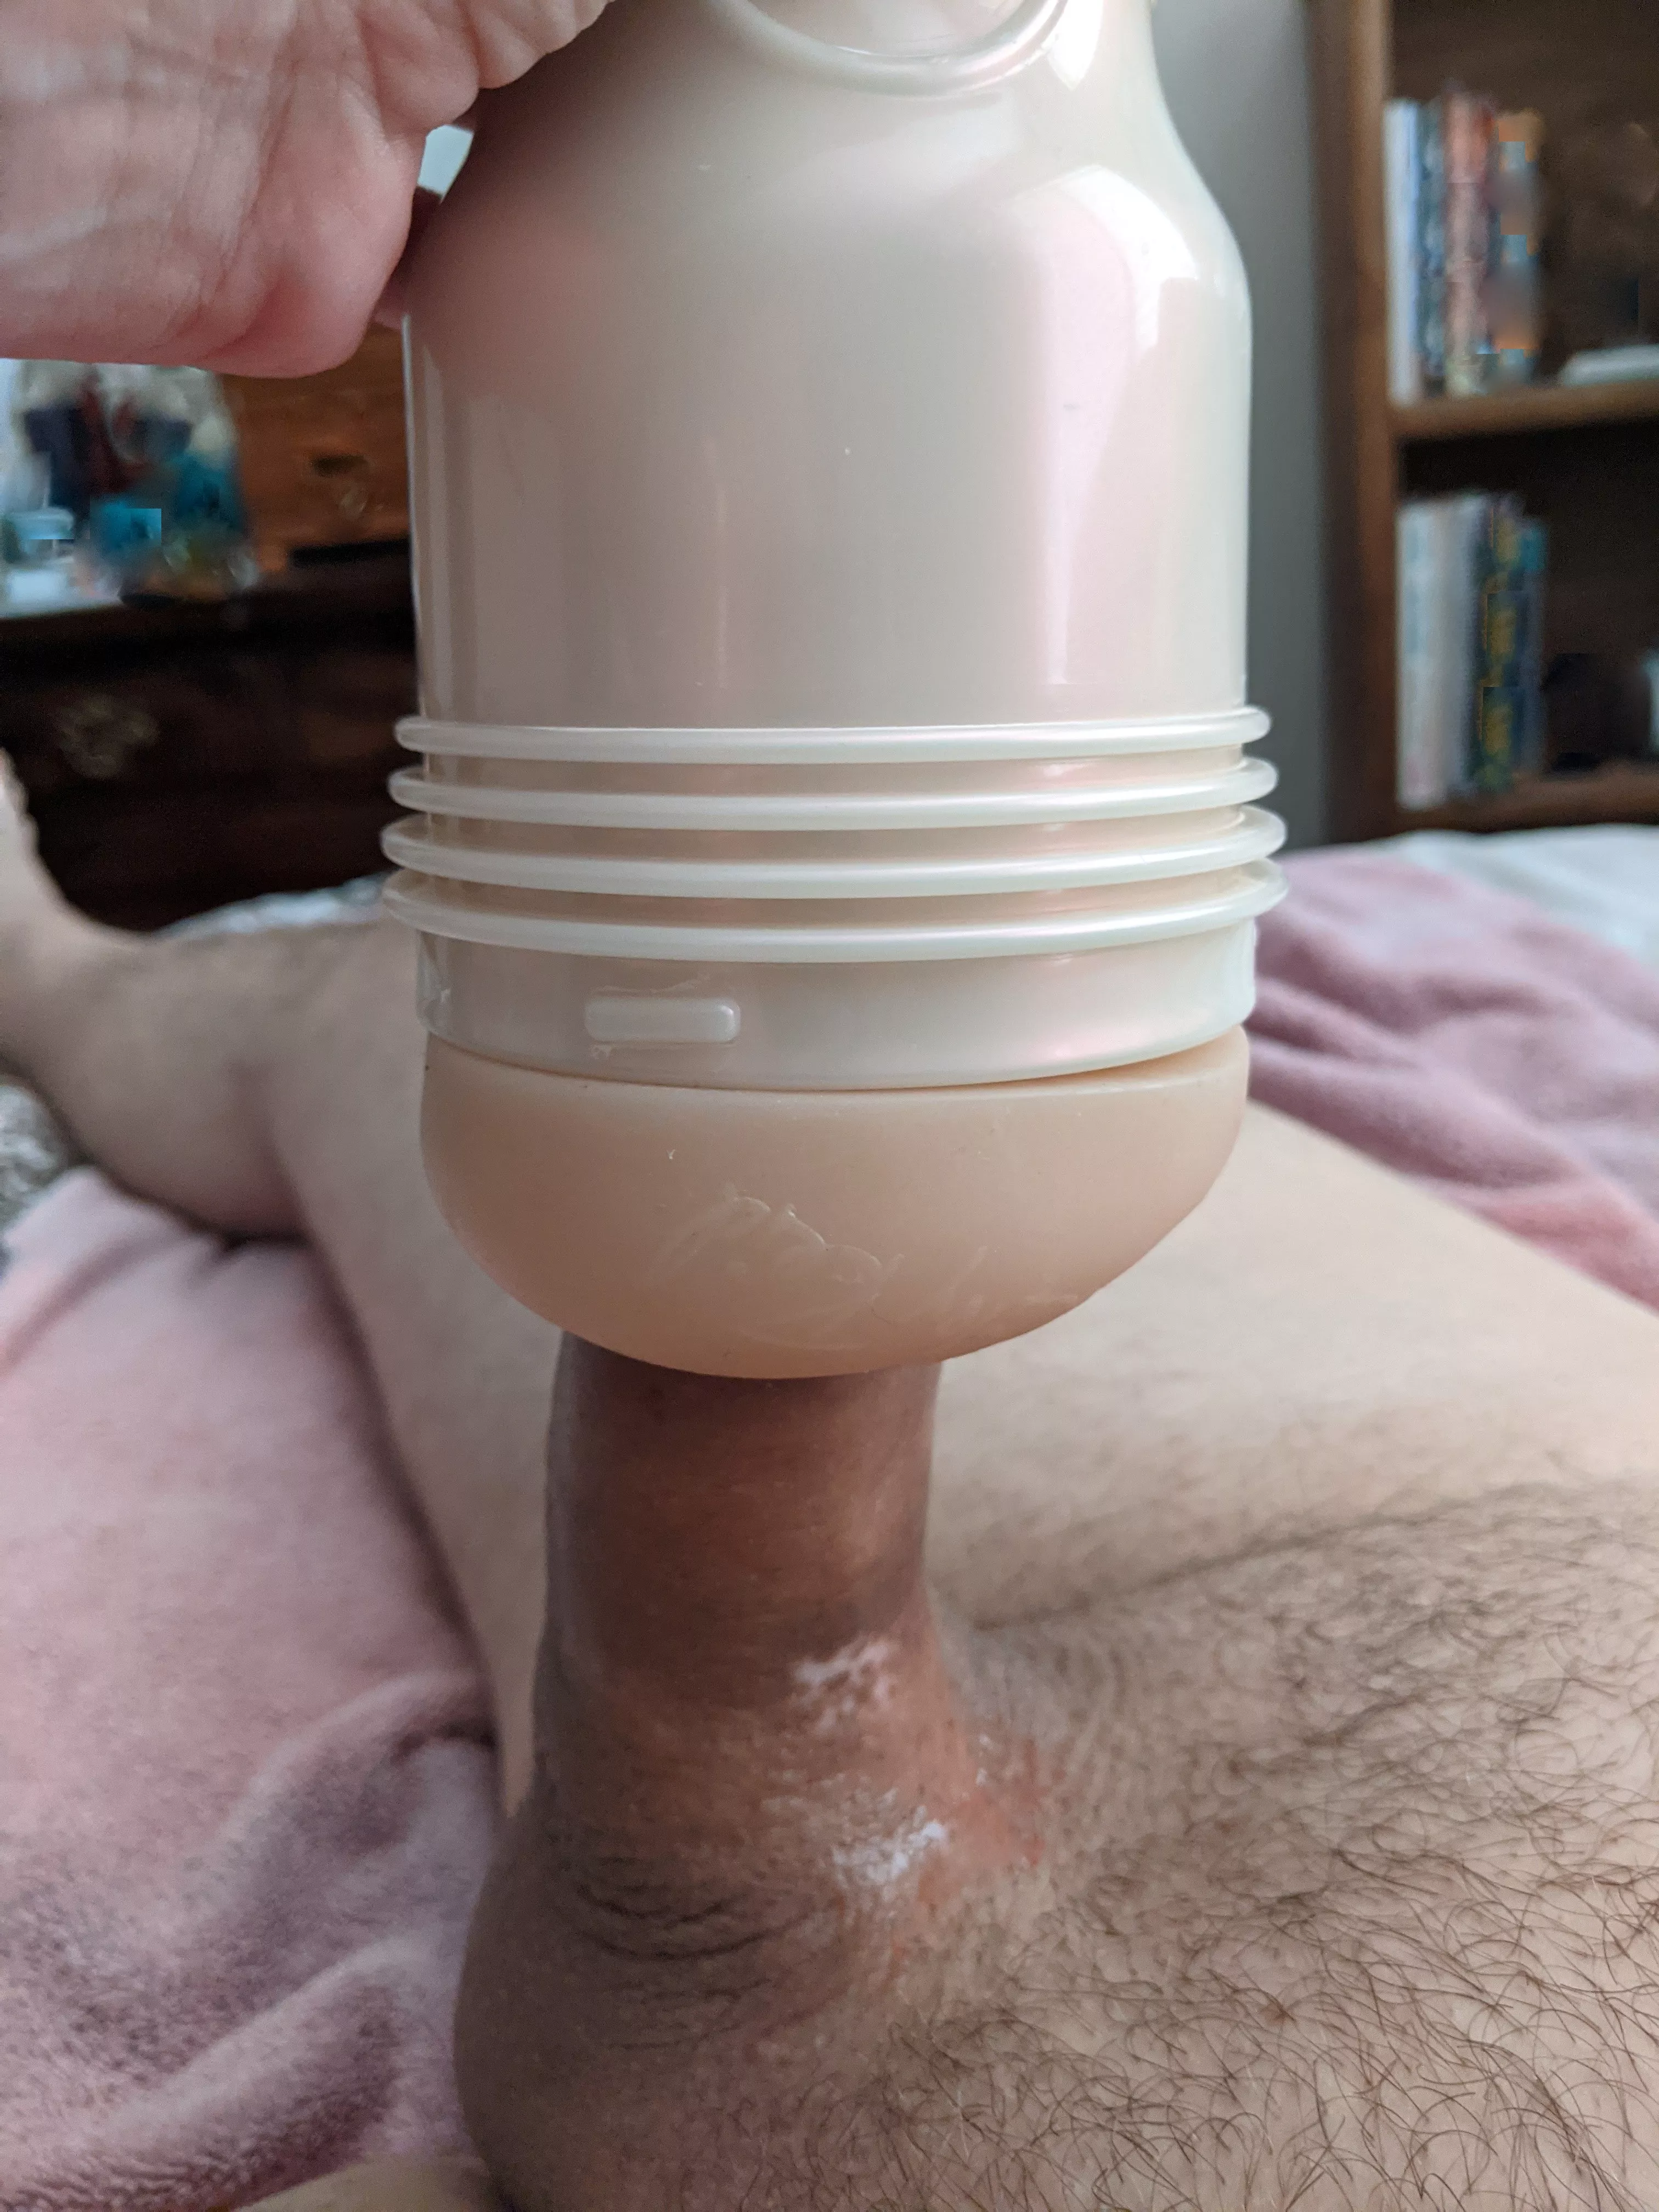 My me fleshlight and Me and